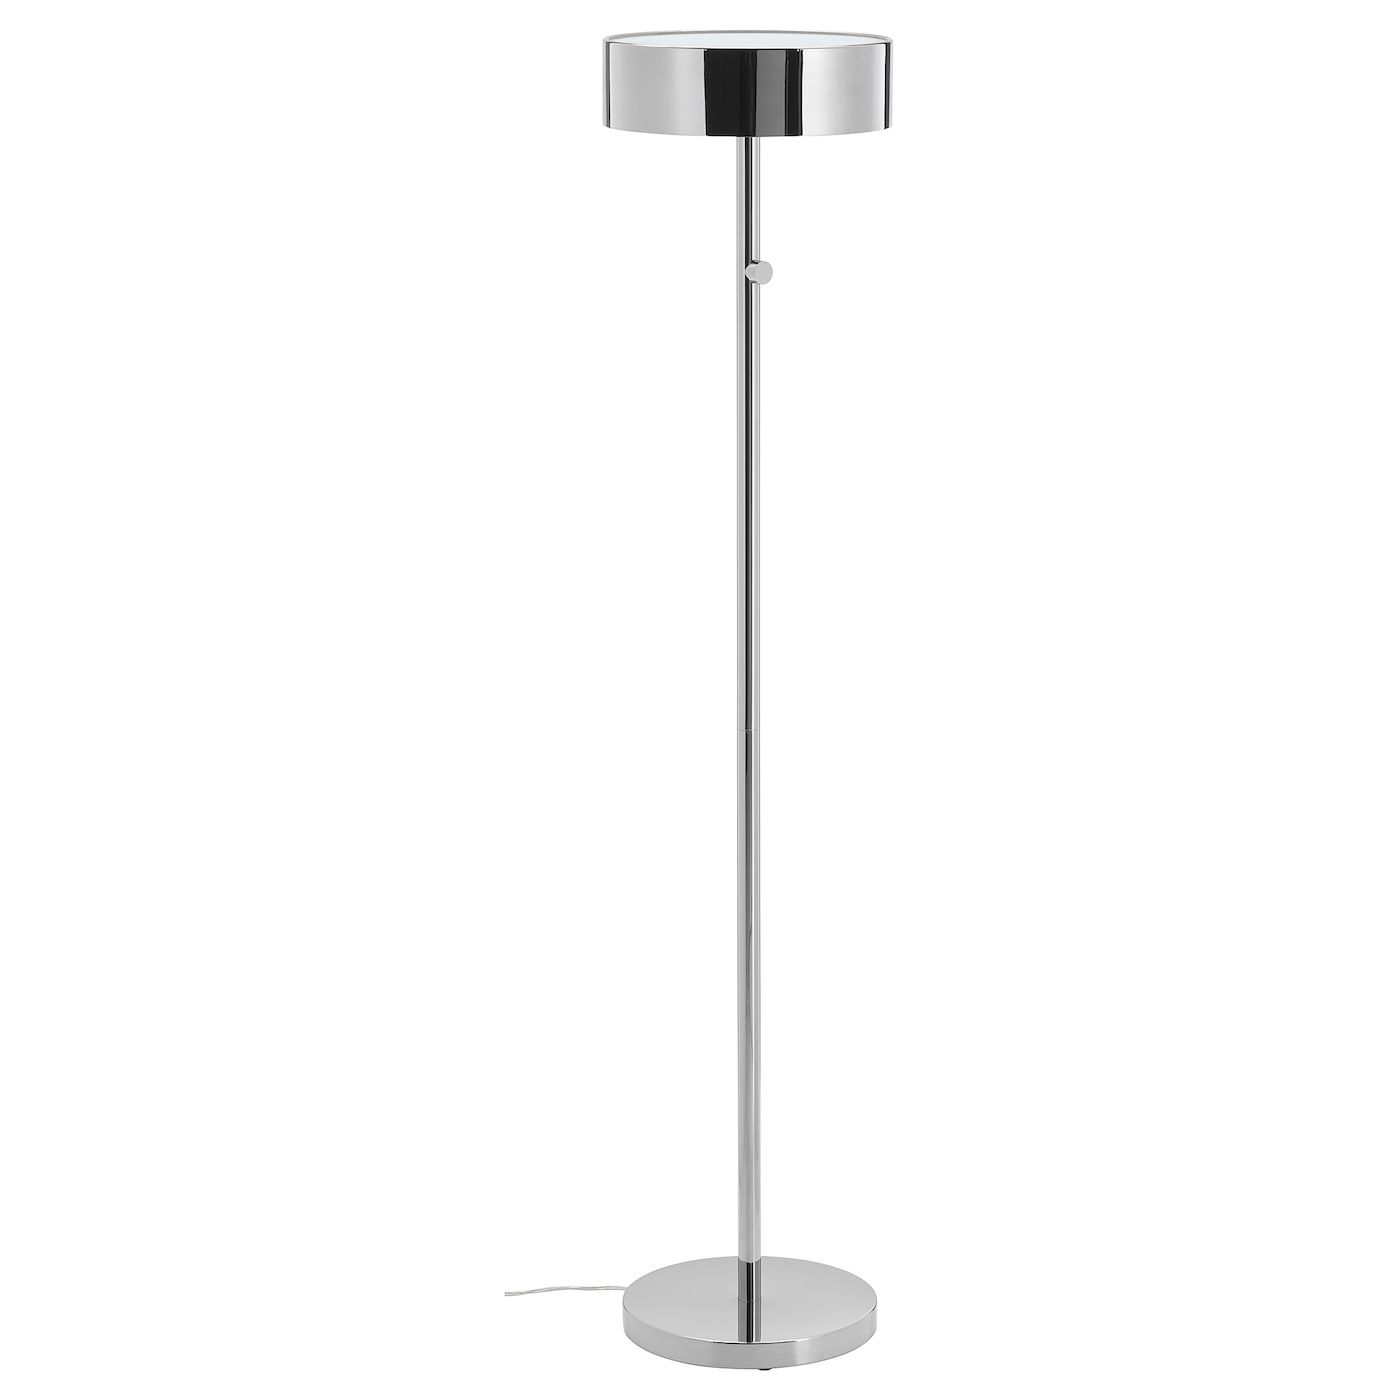 Chrome Finish Metal Floor Lamps Within 2020 Stockholm 2017 Chrome Plated, Floor Lamp – Ikea (View 9 of 15)